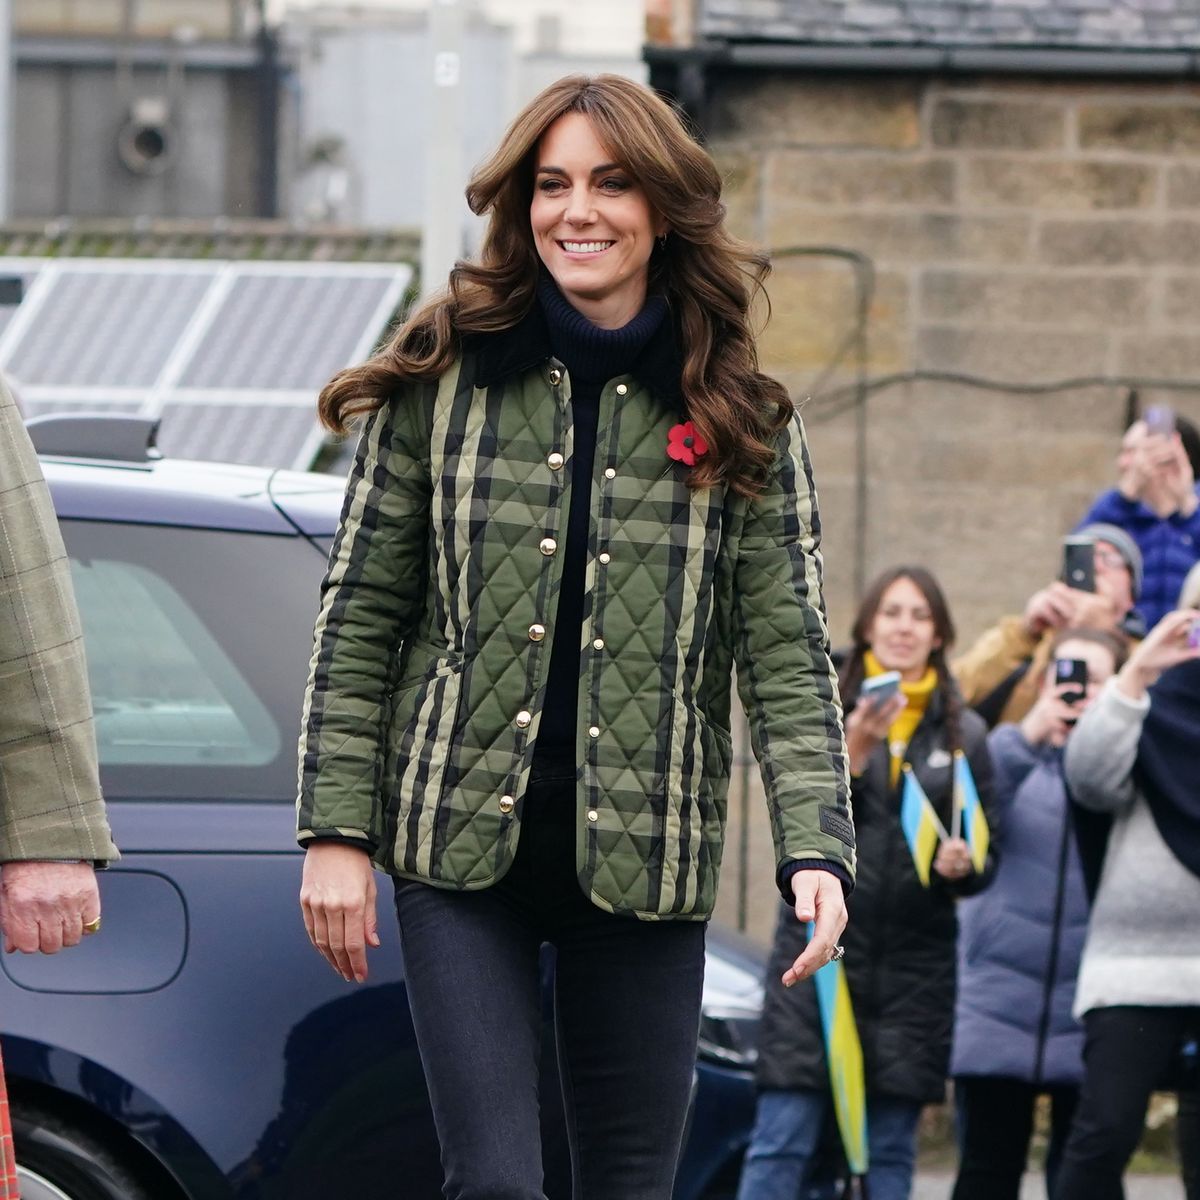 https://hips.hearstapps.com/hmg-prod/images/catherine-princess-of-wales-known-as-the-duchess-of-news-photo-1698930481.jpg?crop=1xw:0.66755xh;center,top&resize=1200:*